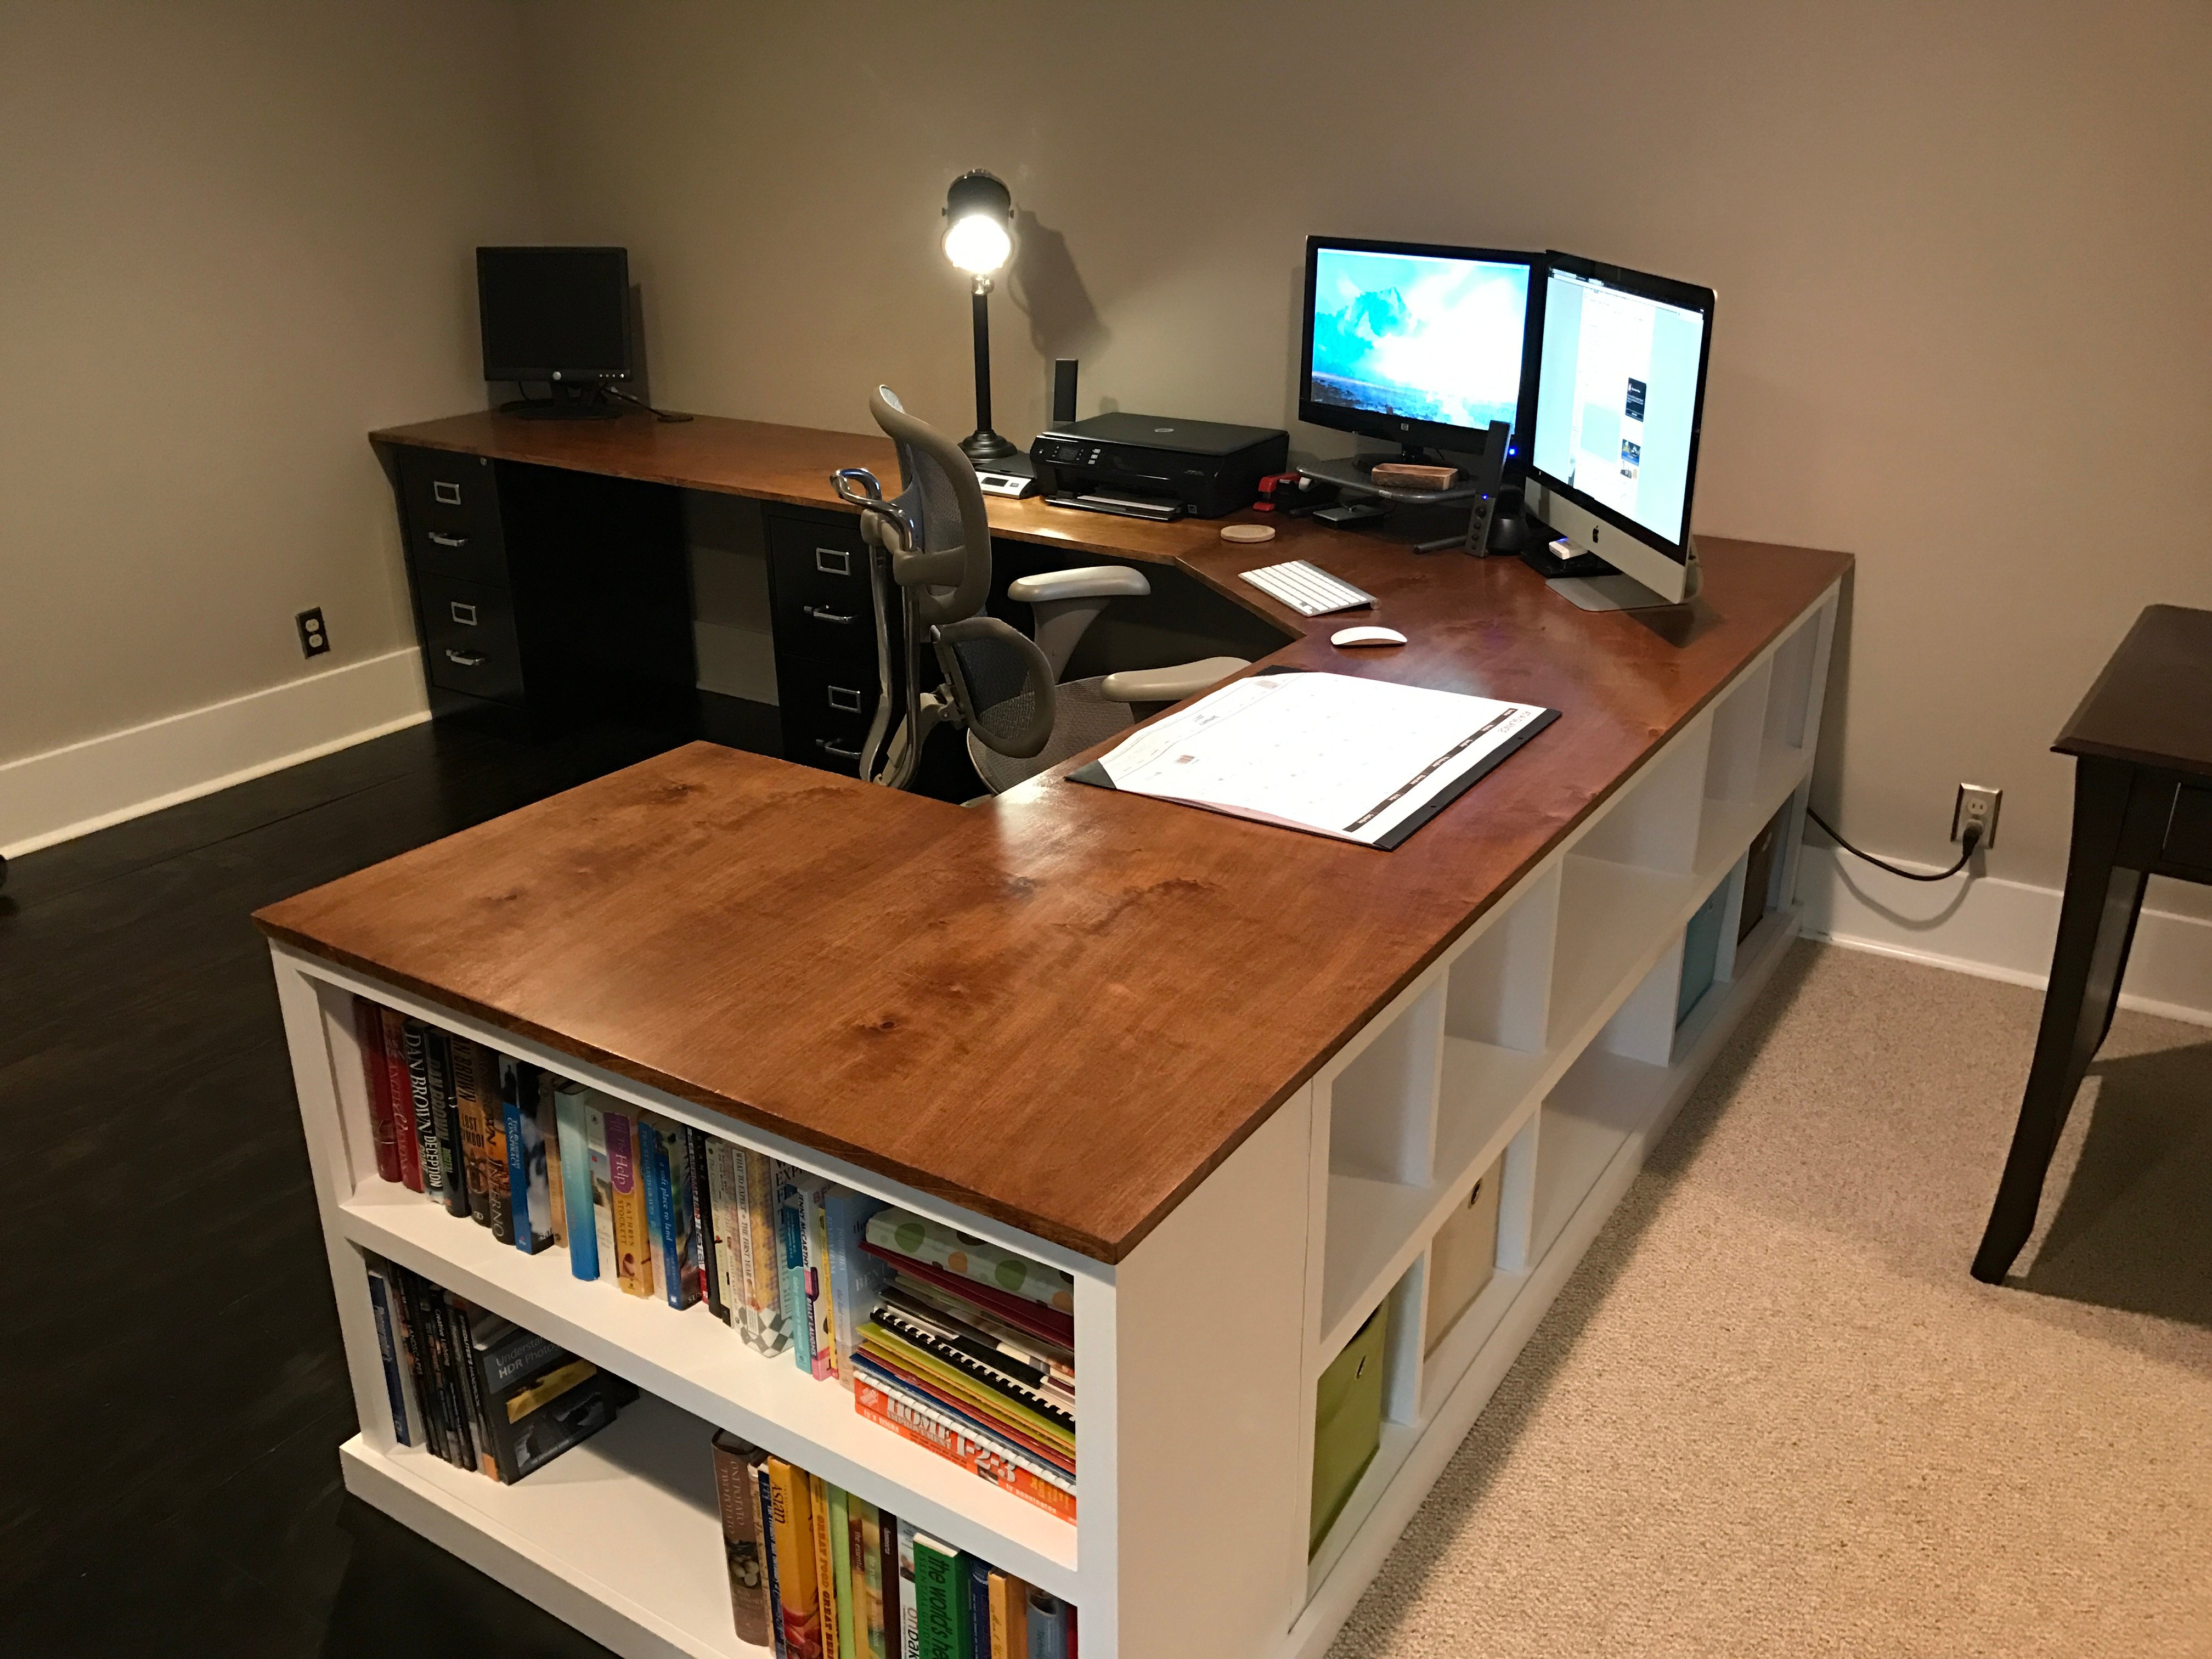 How To Build a Giant Corner Desk - Woodworking 